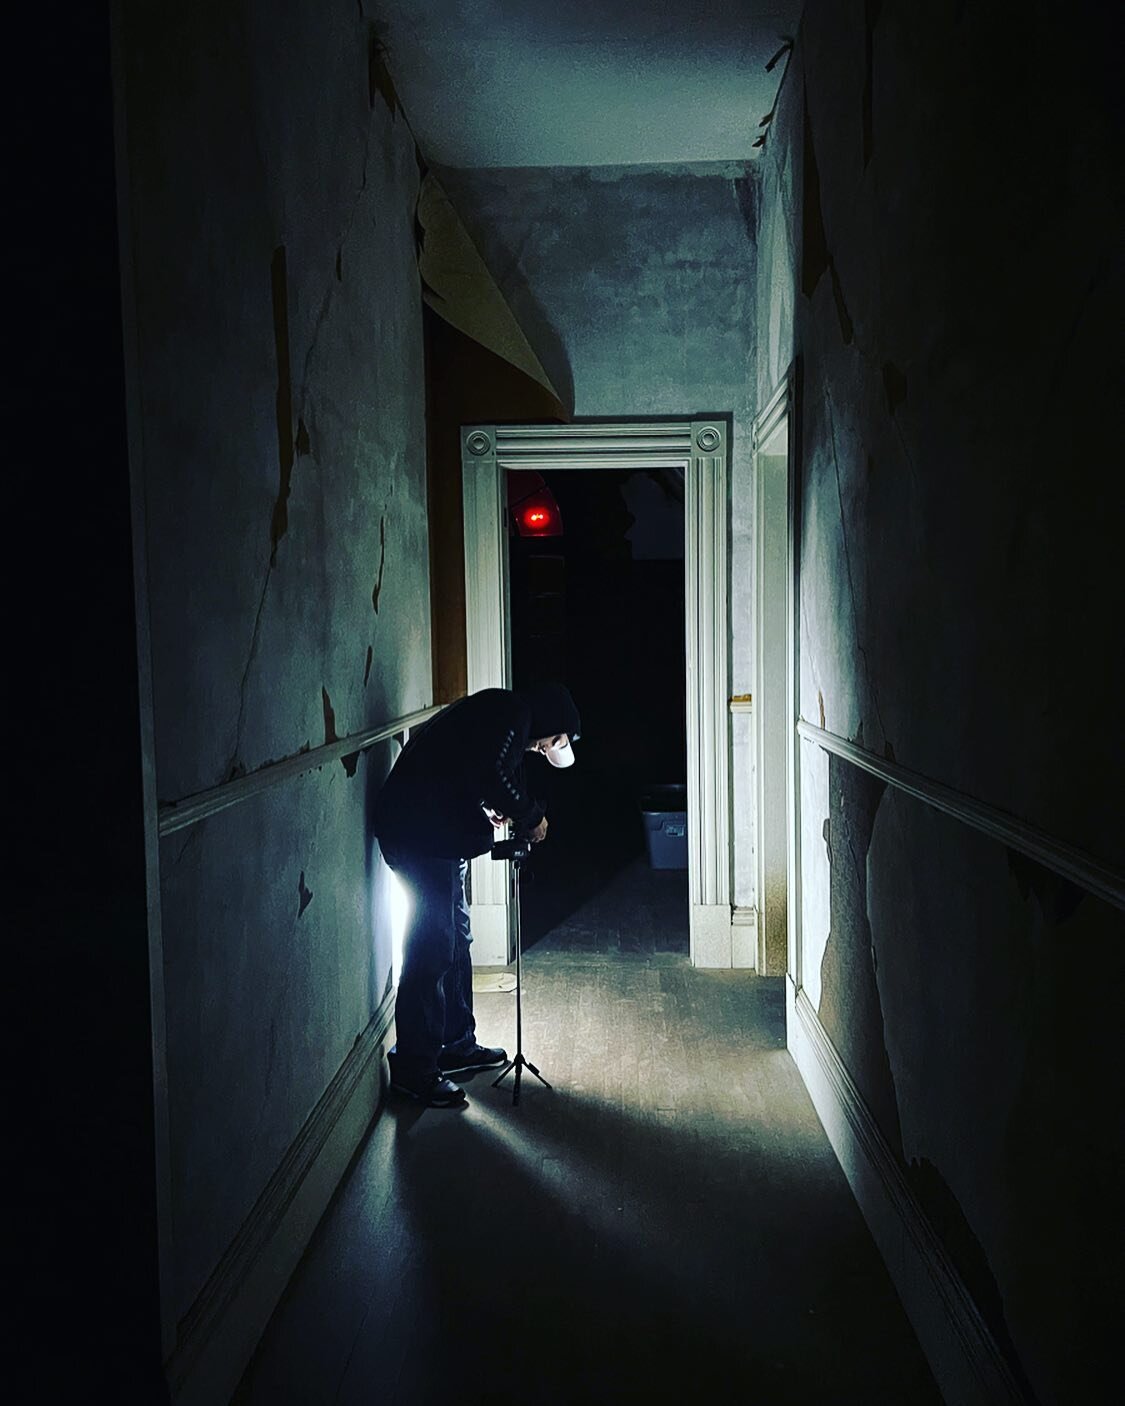 Looking for an adventure? We&rsquo;ve got a rare last minute opening for a private investigation June 11th! Contact us today for more details.